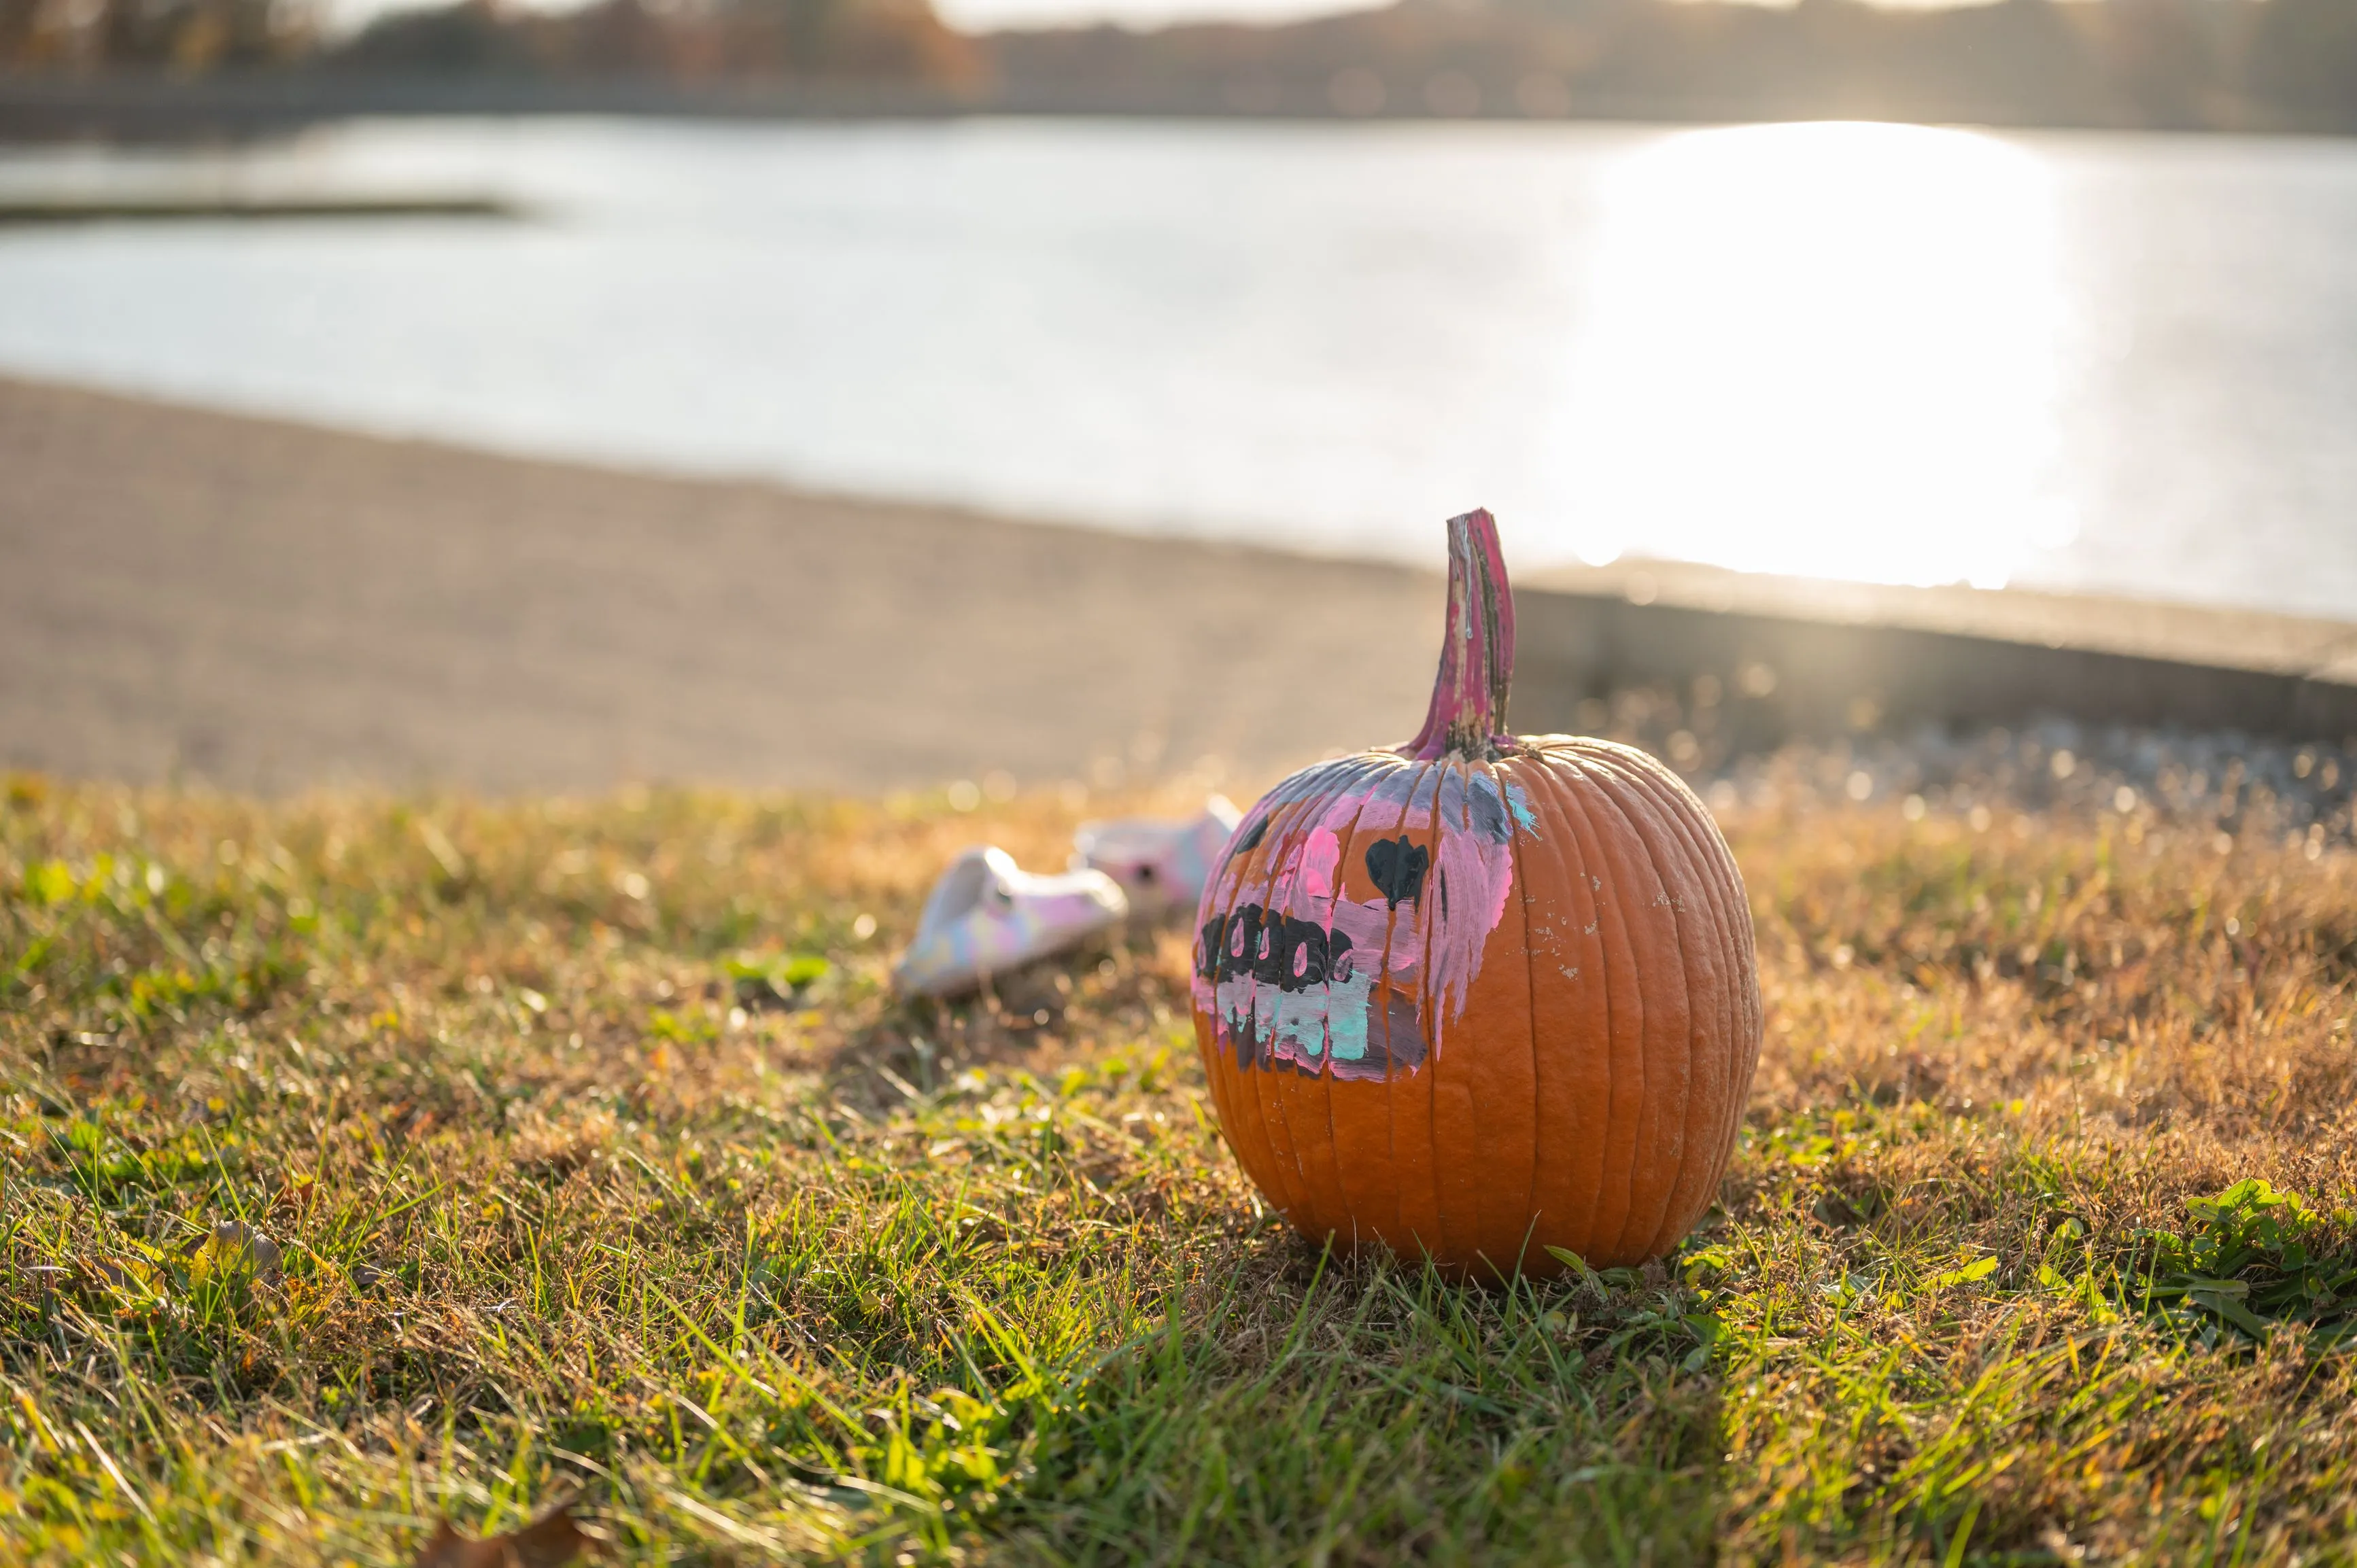 A decorated pumpkin with a face and an arm reaching out of its mouth, set on grass by a water body in the backdrop of a sunset.